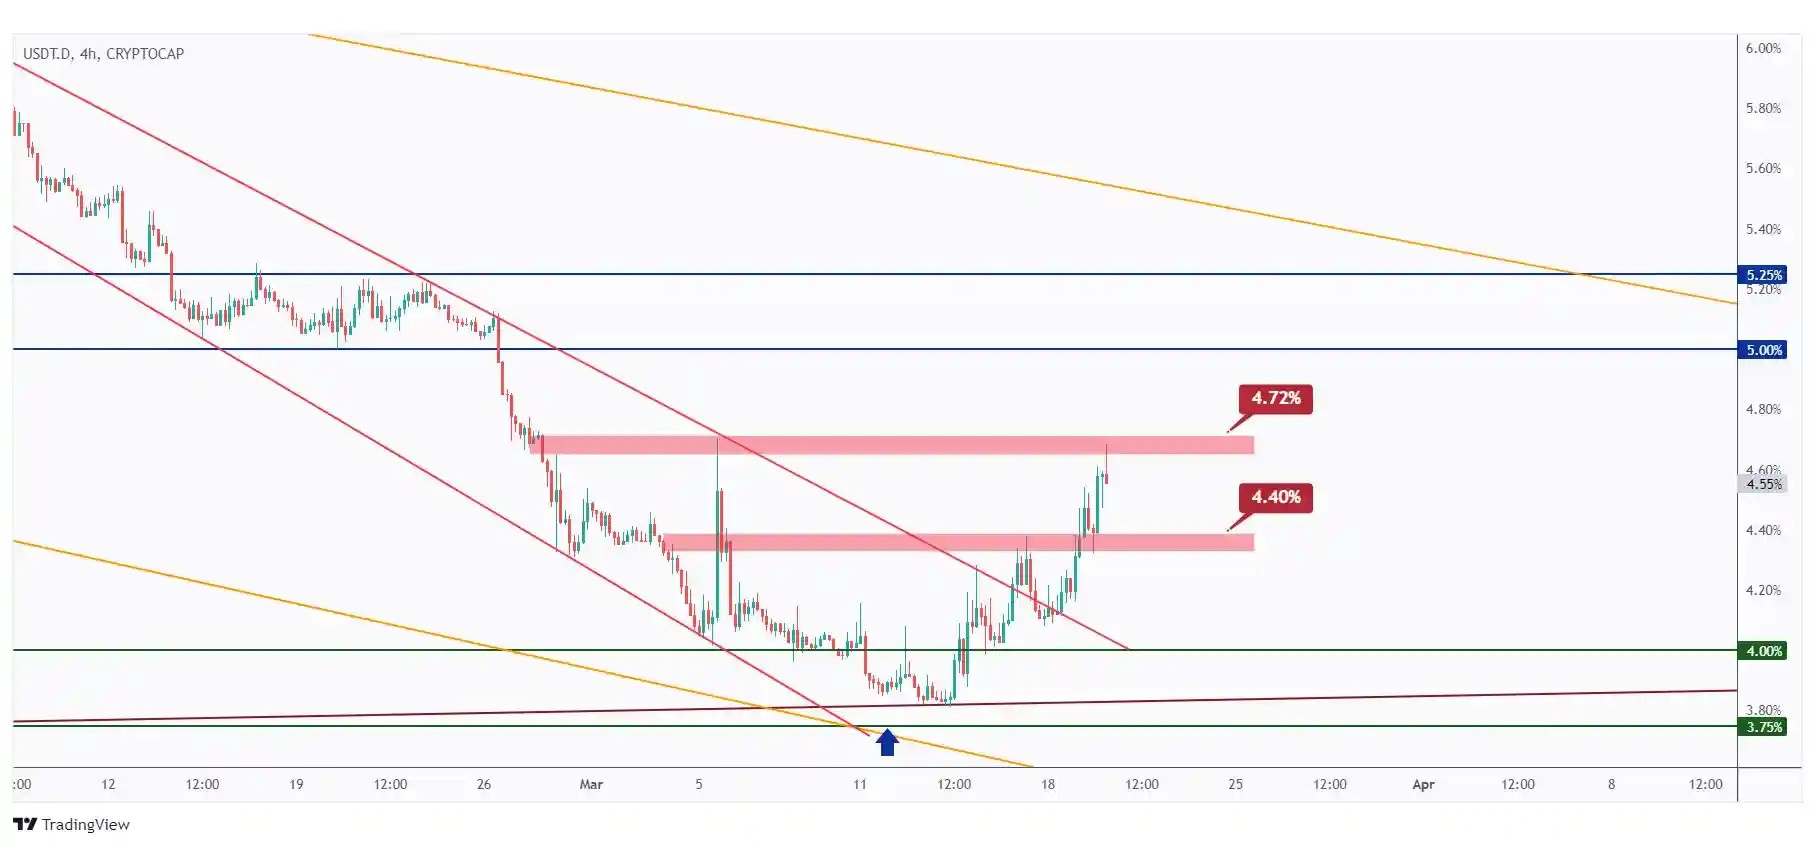 USDT.D 4H chart hovering within a narrow range between 4.4% and 4.72%.